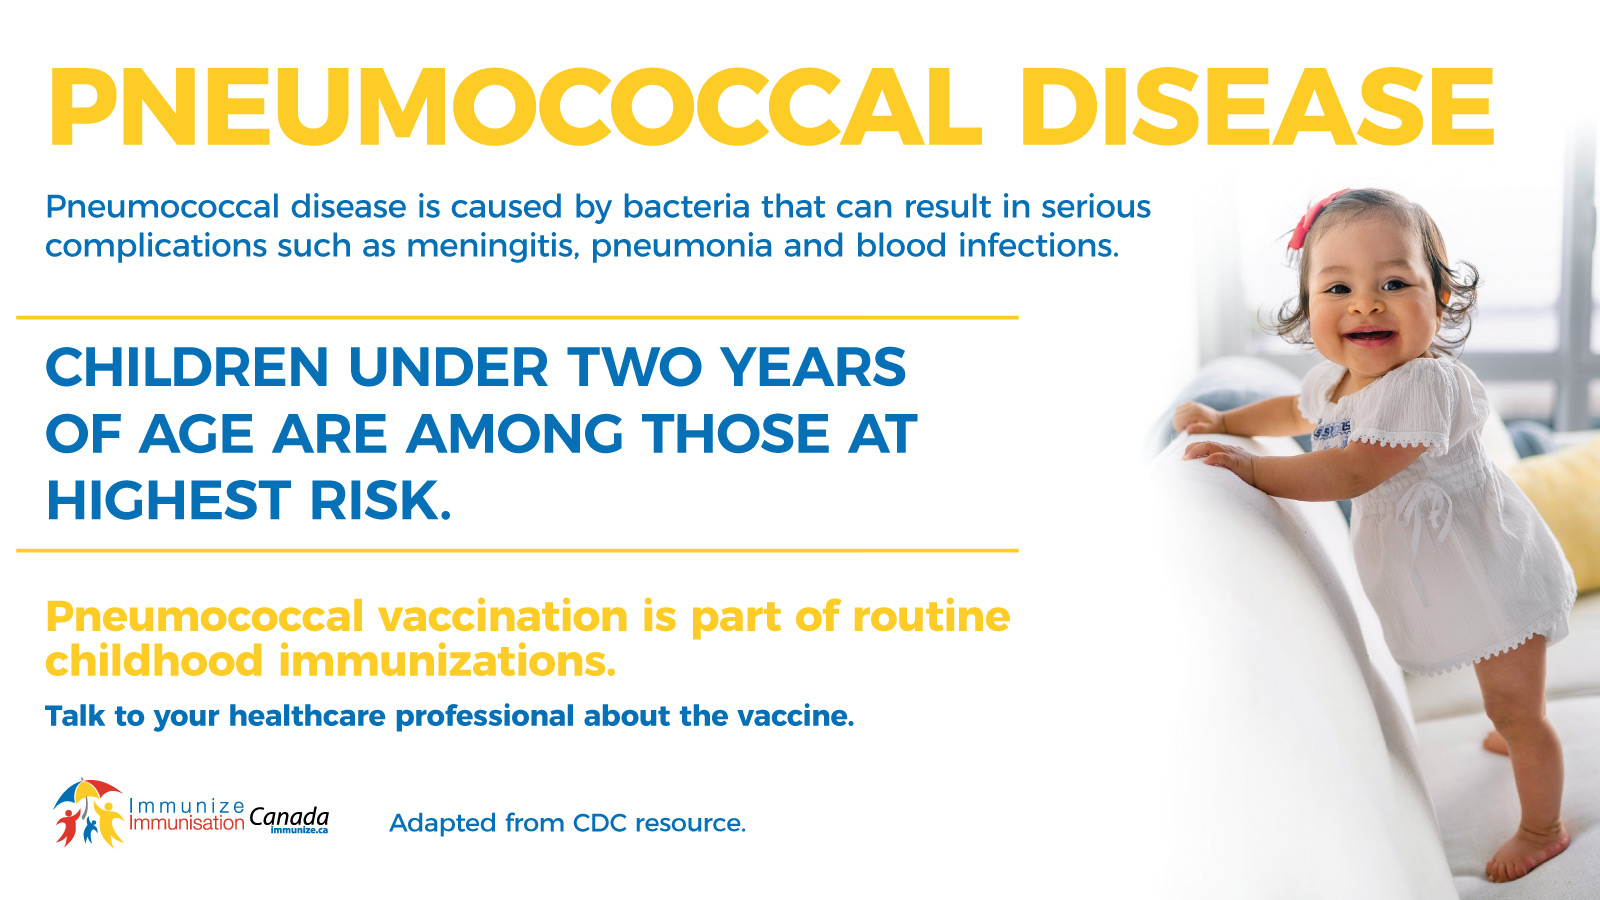 Pneumococcal disease: Children under two years of age (social media image for Twitter)